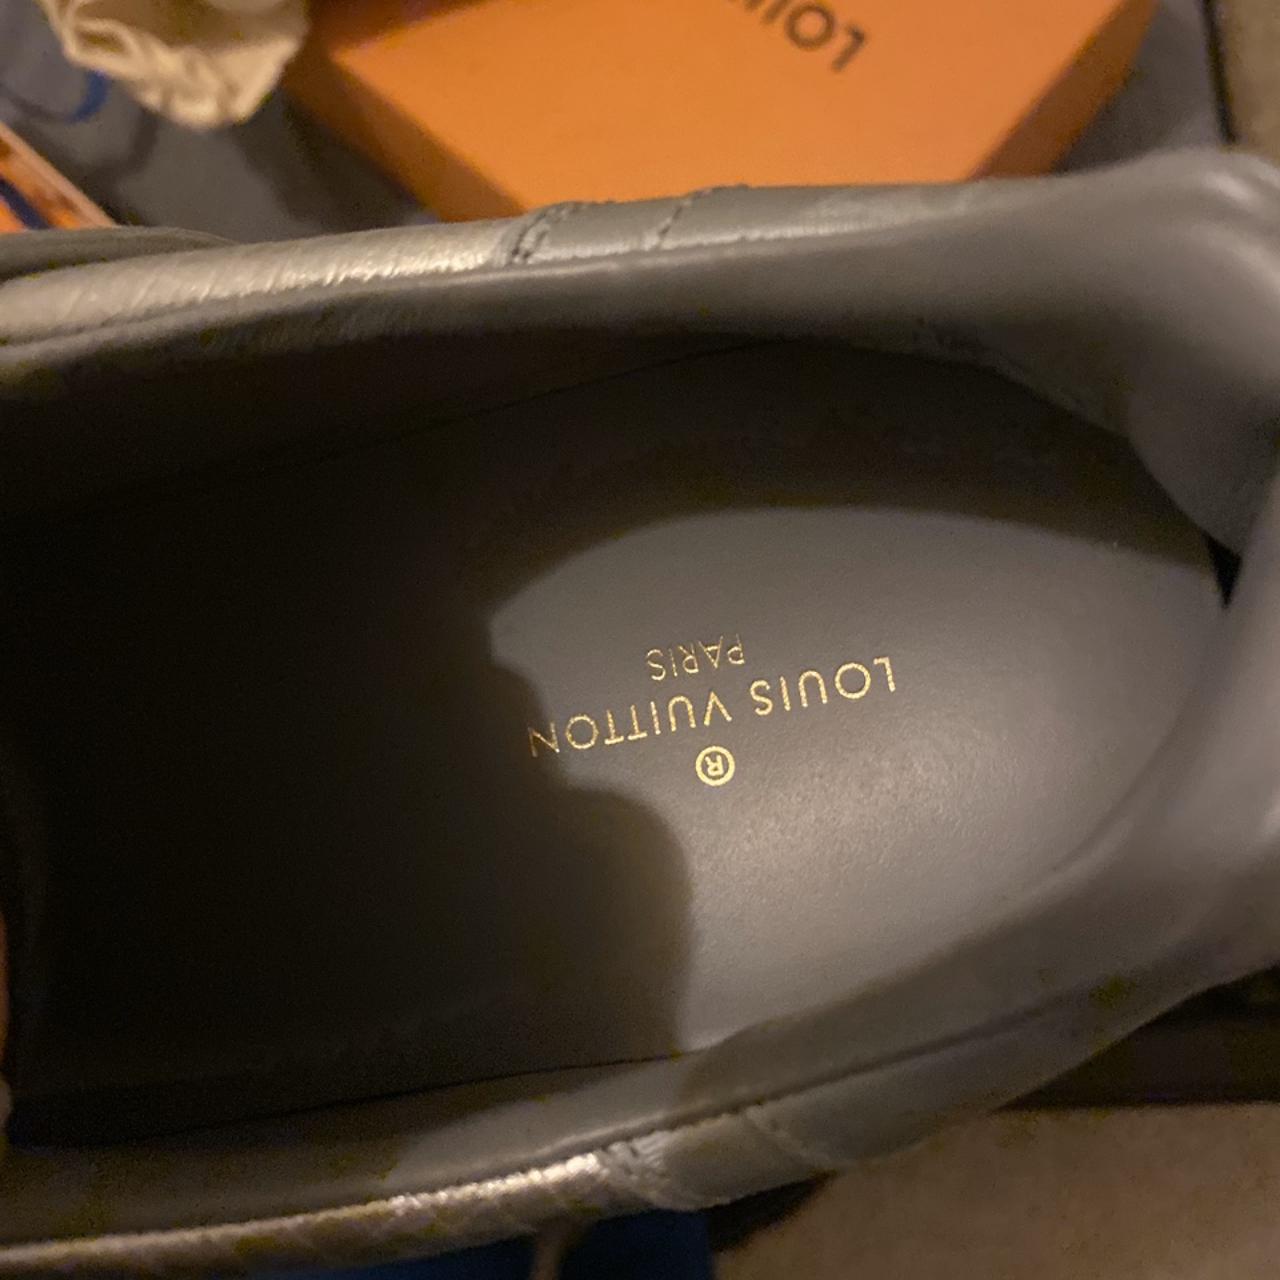 Louis Vuitton Beverly Hills Trainer. LV, Size UK